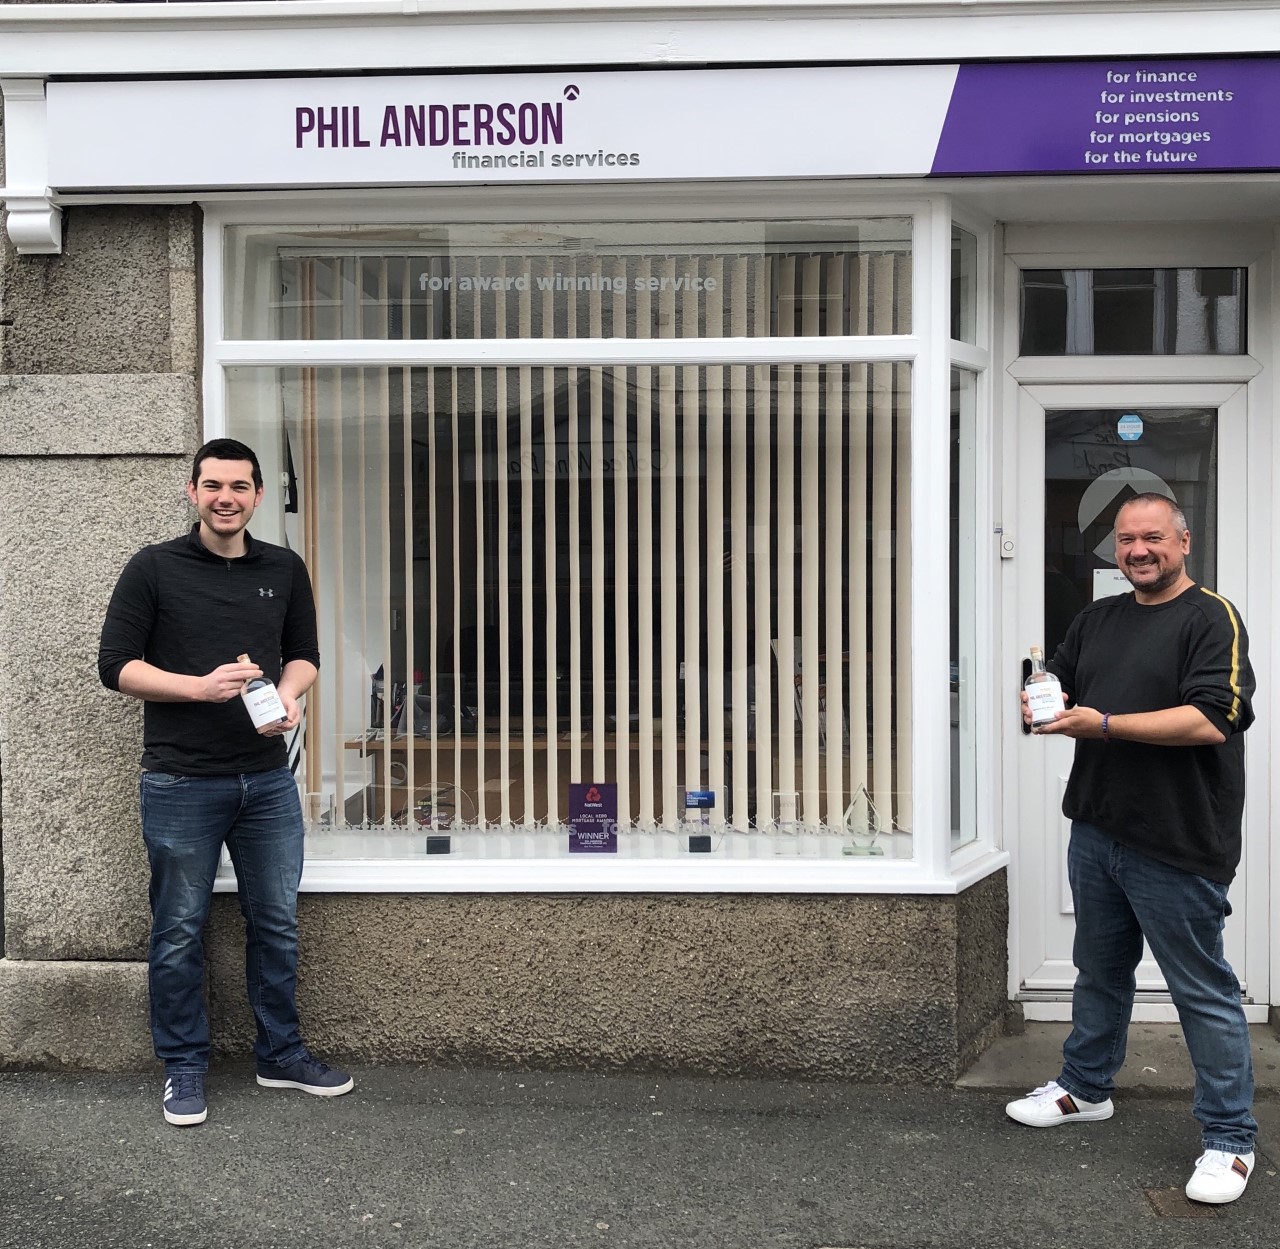 Phil Anderson Financial Services celebrates key workers with £1,000 gin giveaway